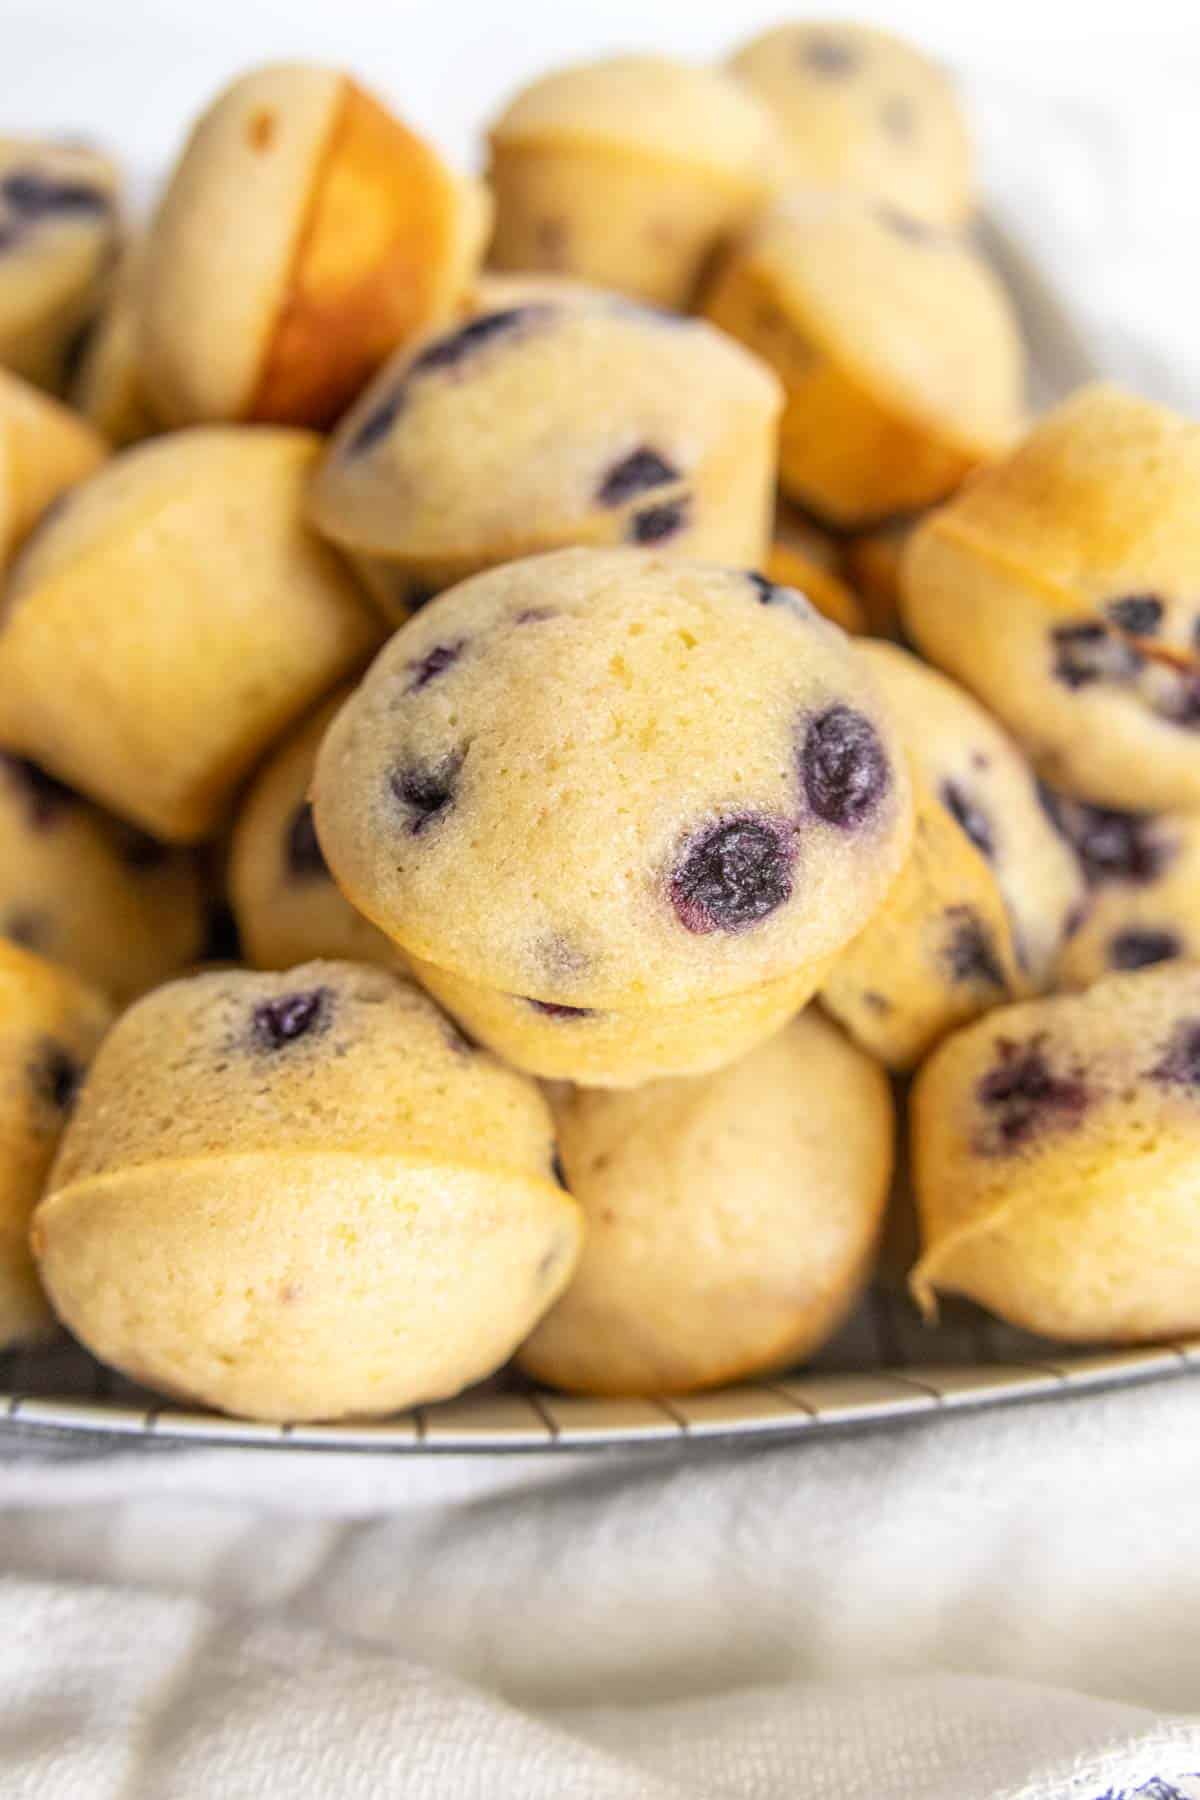 A close-up image of a plate of mini blueberry muffins. The muffins are golden-brown with visible blueberries baked into them.